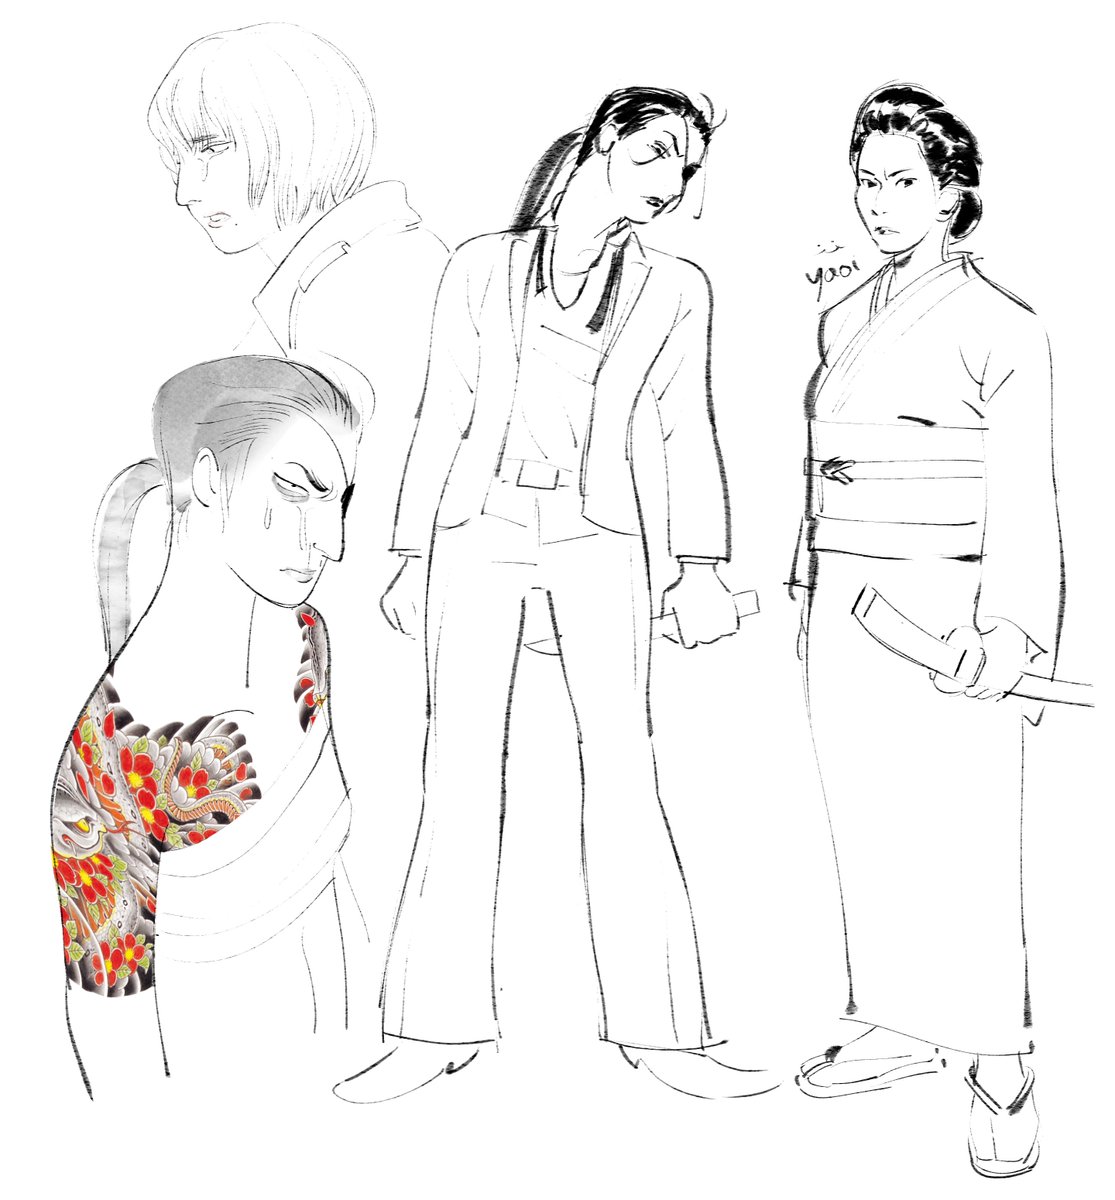 i did finish yakuza 4 but sadly I didn't draw as much during it because I am artblocked atm 💔 anyway I love hana